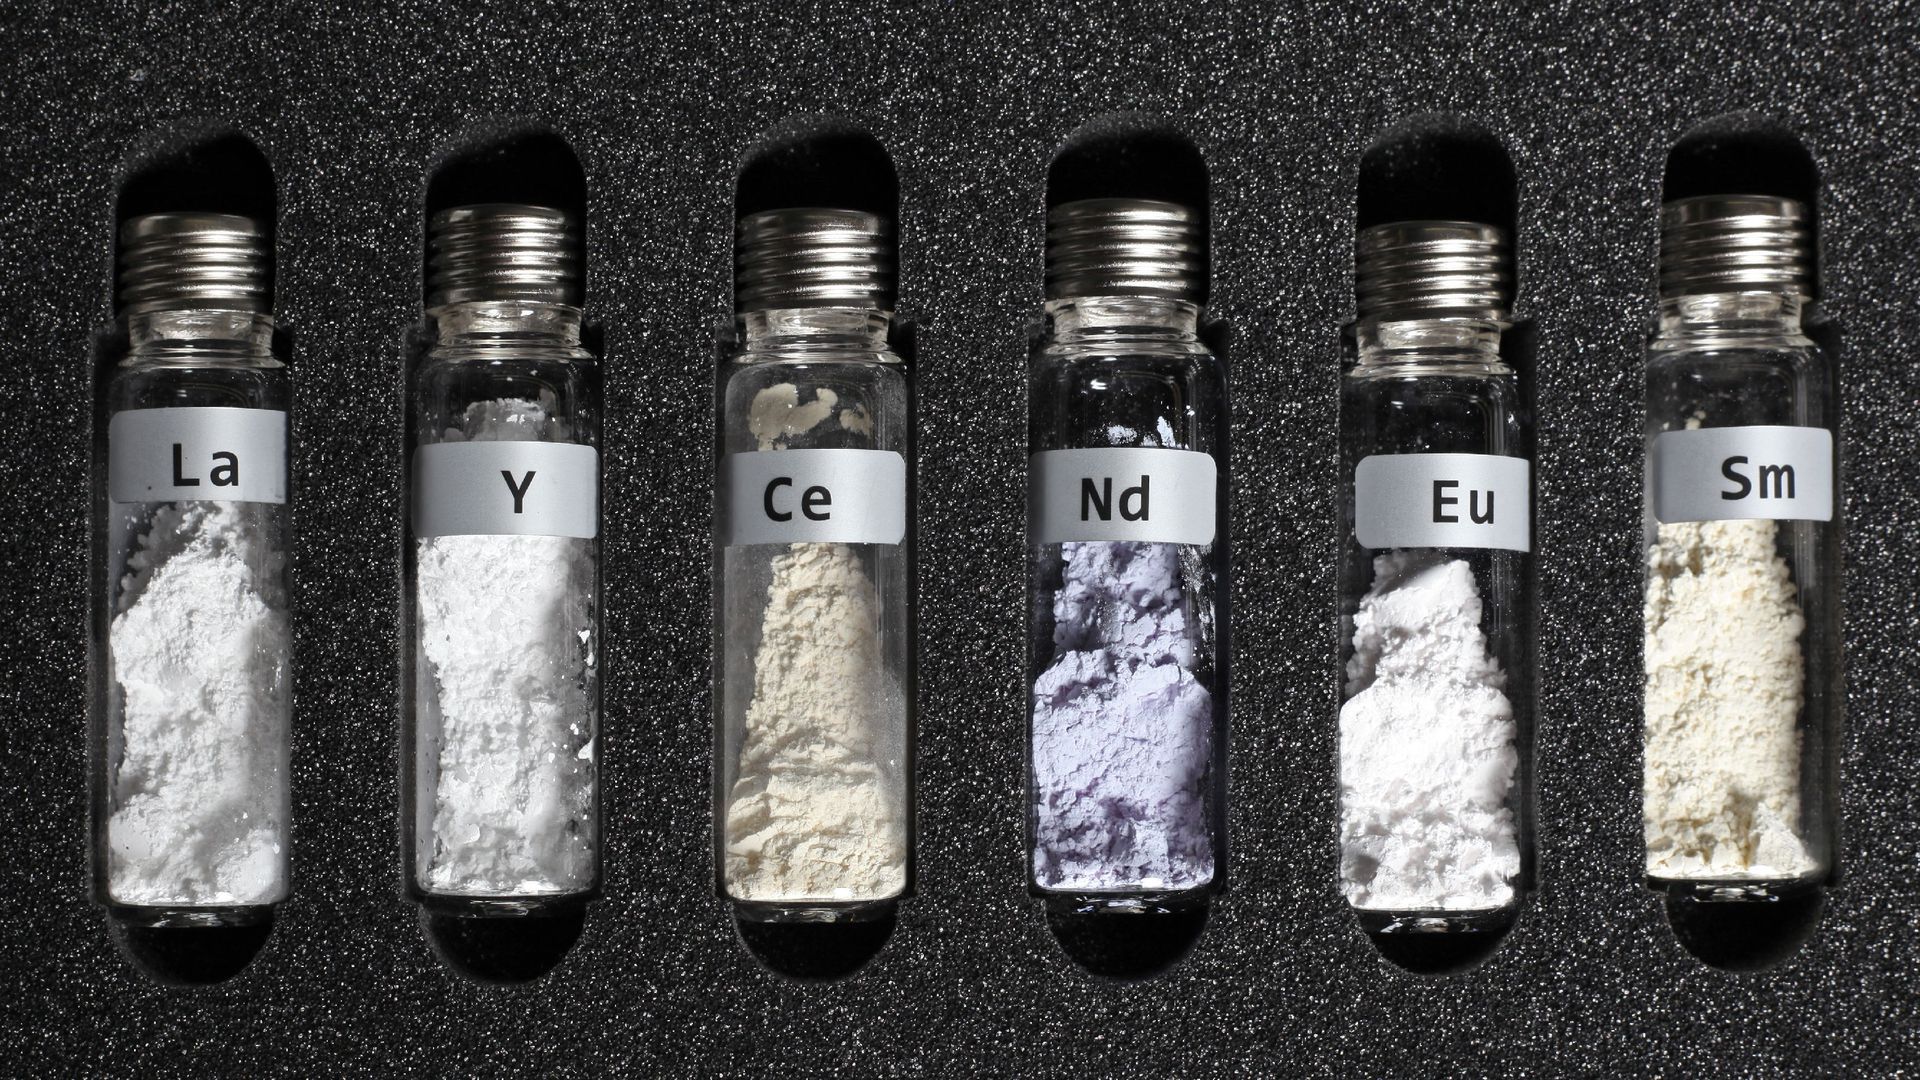 An image of various rare earth minerals